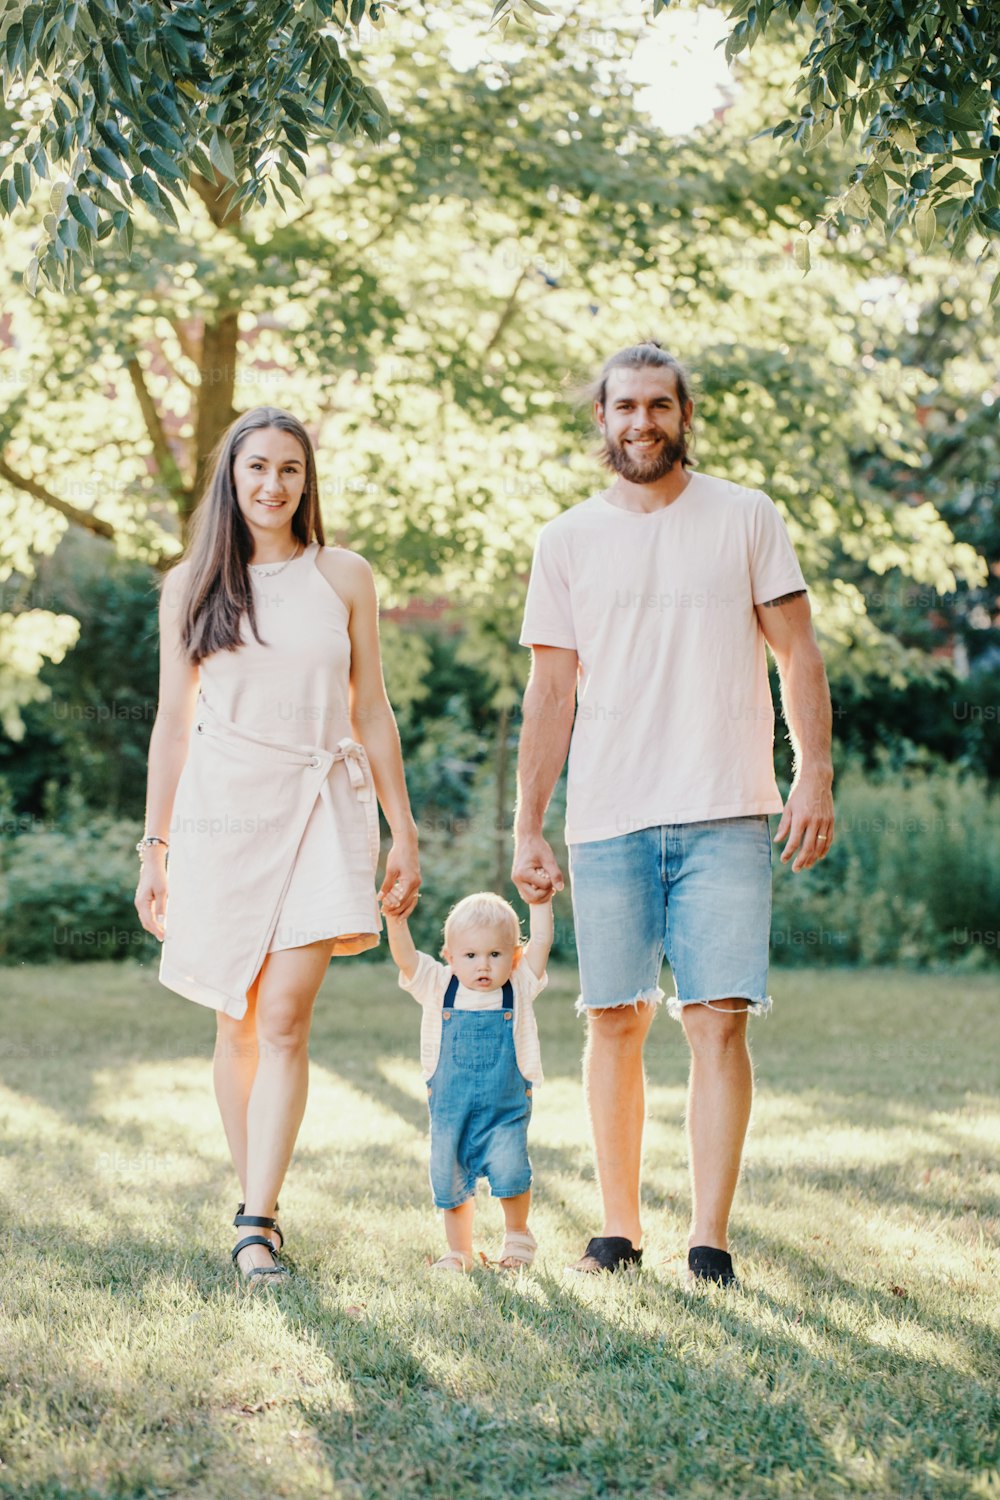 Happy smiling mother and father hold hands with baby boy in park outdoor. Family Caucasian mom and dad with son walking together. Happy family authentic lifestyle concept.